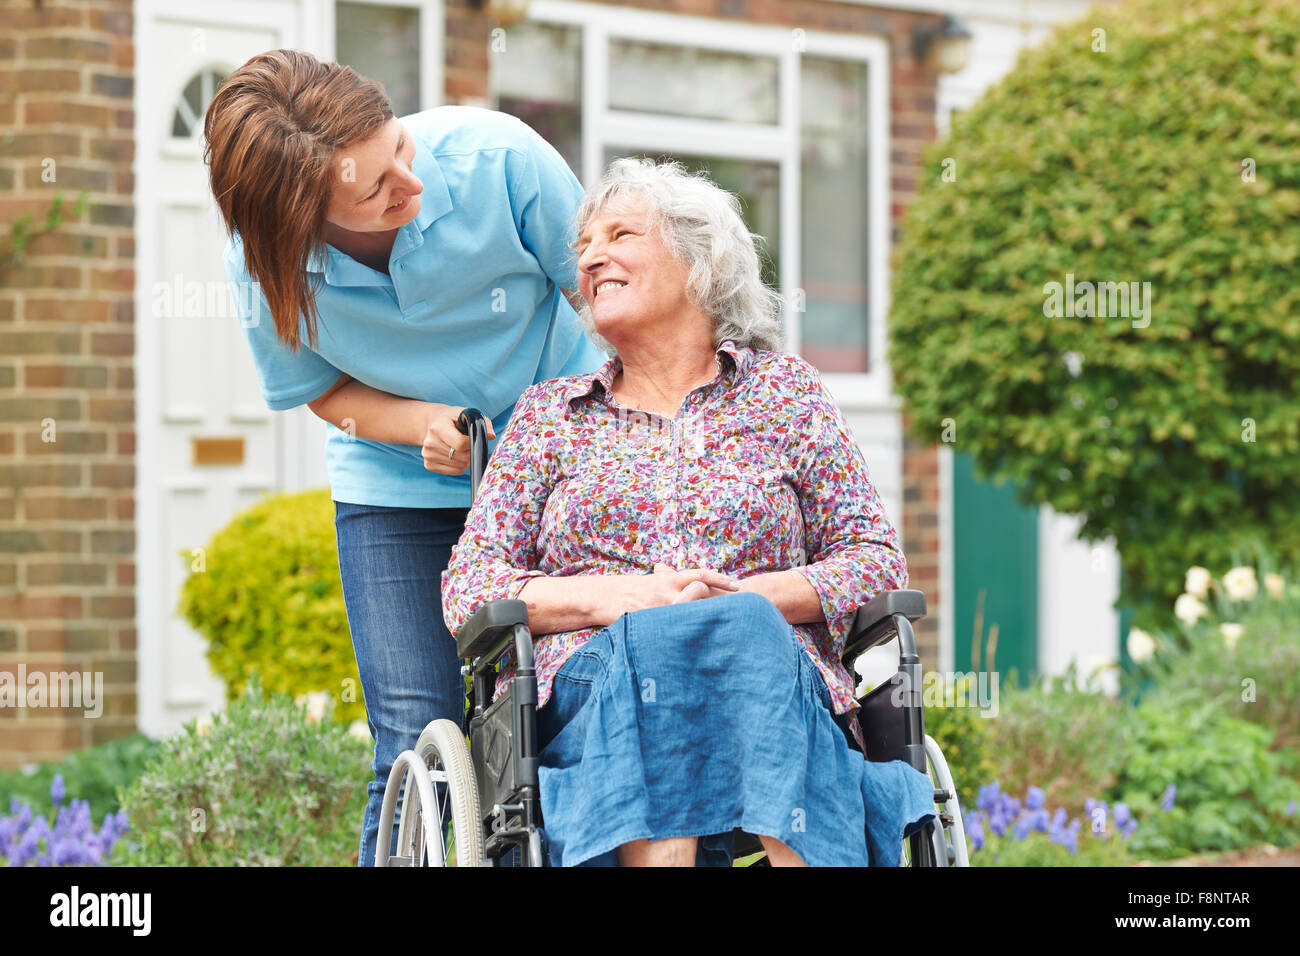 Carer With Senior Woman In Wheelchair Stock Photo